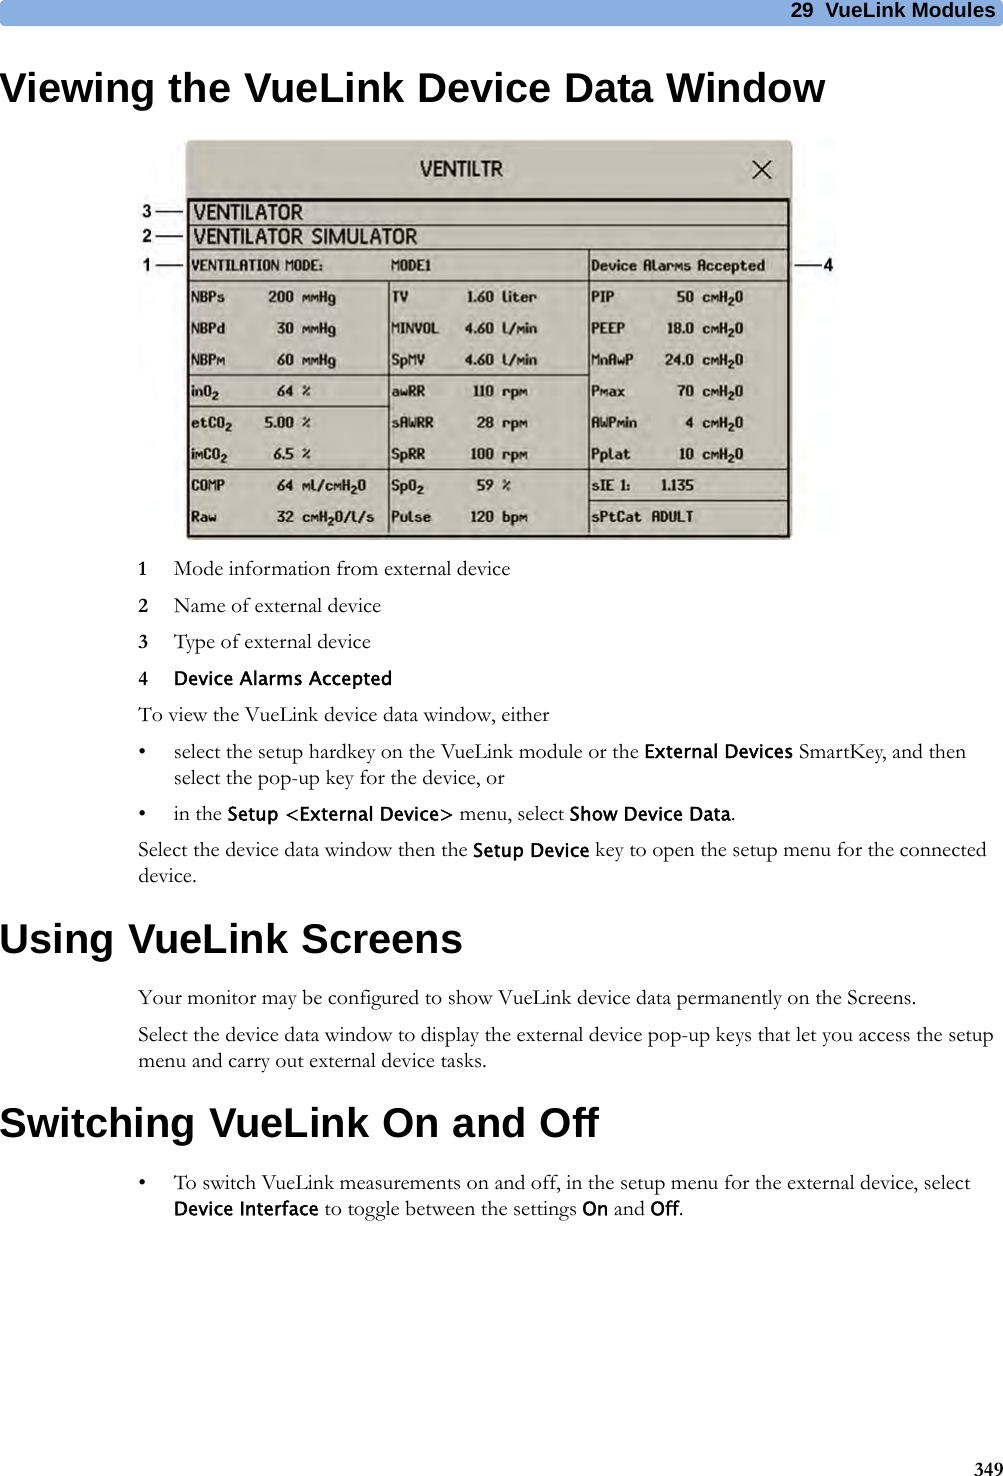 29 VueLink Modules349Viewing the VueLink Device Data Window1Mode information from external device2Name of external device3Type of external device4Device Alarms AcceptedTo view the VueLink device data window, either• select the setup hardkey on the VueLink module or the External Devices SmartKey, and then select the pop-up key for the device, or•in the Setup &lt;External Device&gt; menu, select Show Device Data.Select the device data window then the Setup Device key to open the setup menu for the connected device.Using VueLink ScreensYour monitor may be configured to show VueLink device data permanently on the Screens.Select the device data window to display the external device pop-up keys that let you access the setup menu and carry out external device tasks.Switching VueLink On and Off• To switch VueLink measurements on and off, in the setup menu for the external device, select Device Interface to toggle between the settings On and Off.